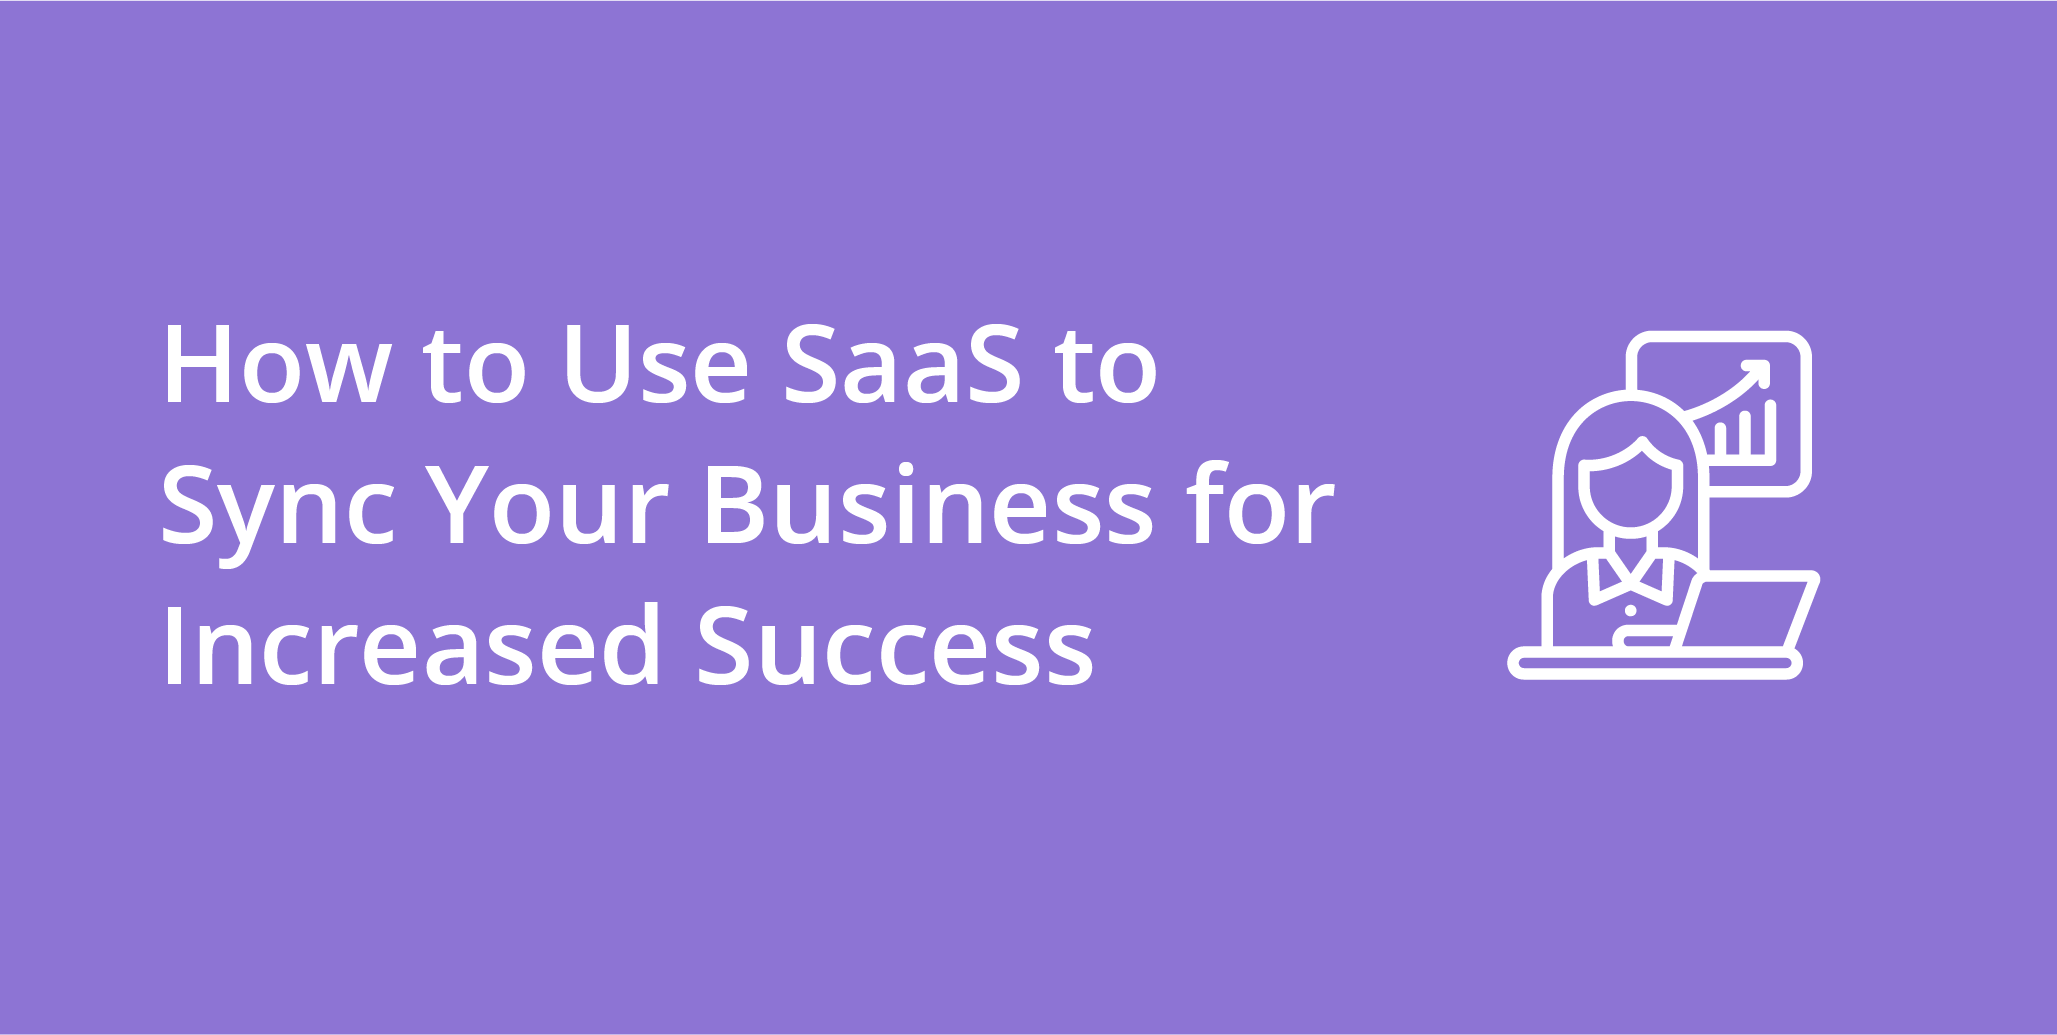 How to Use SaaS to Sync Your Business for Increased Success | Telephones for business